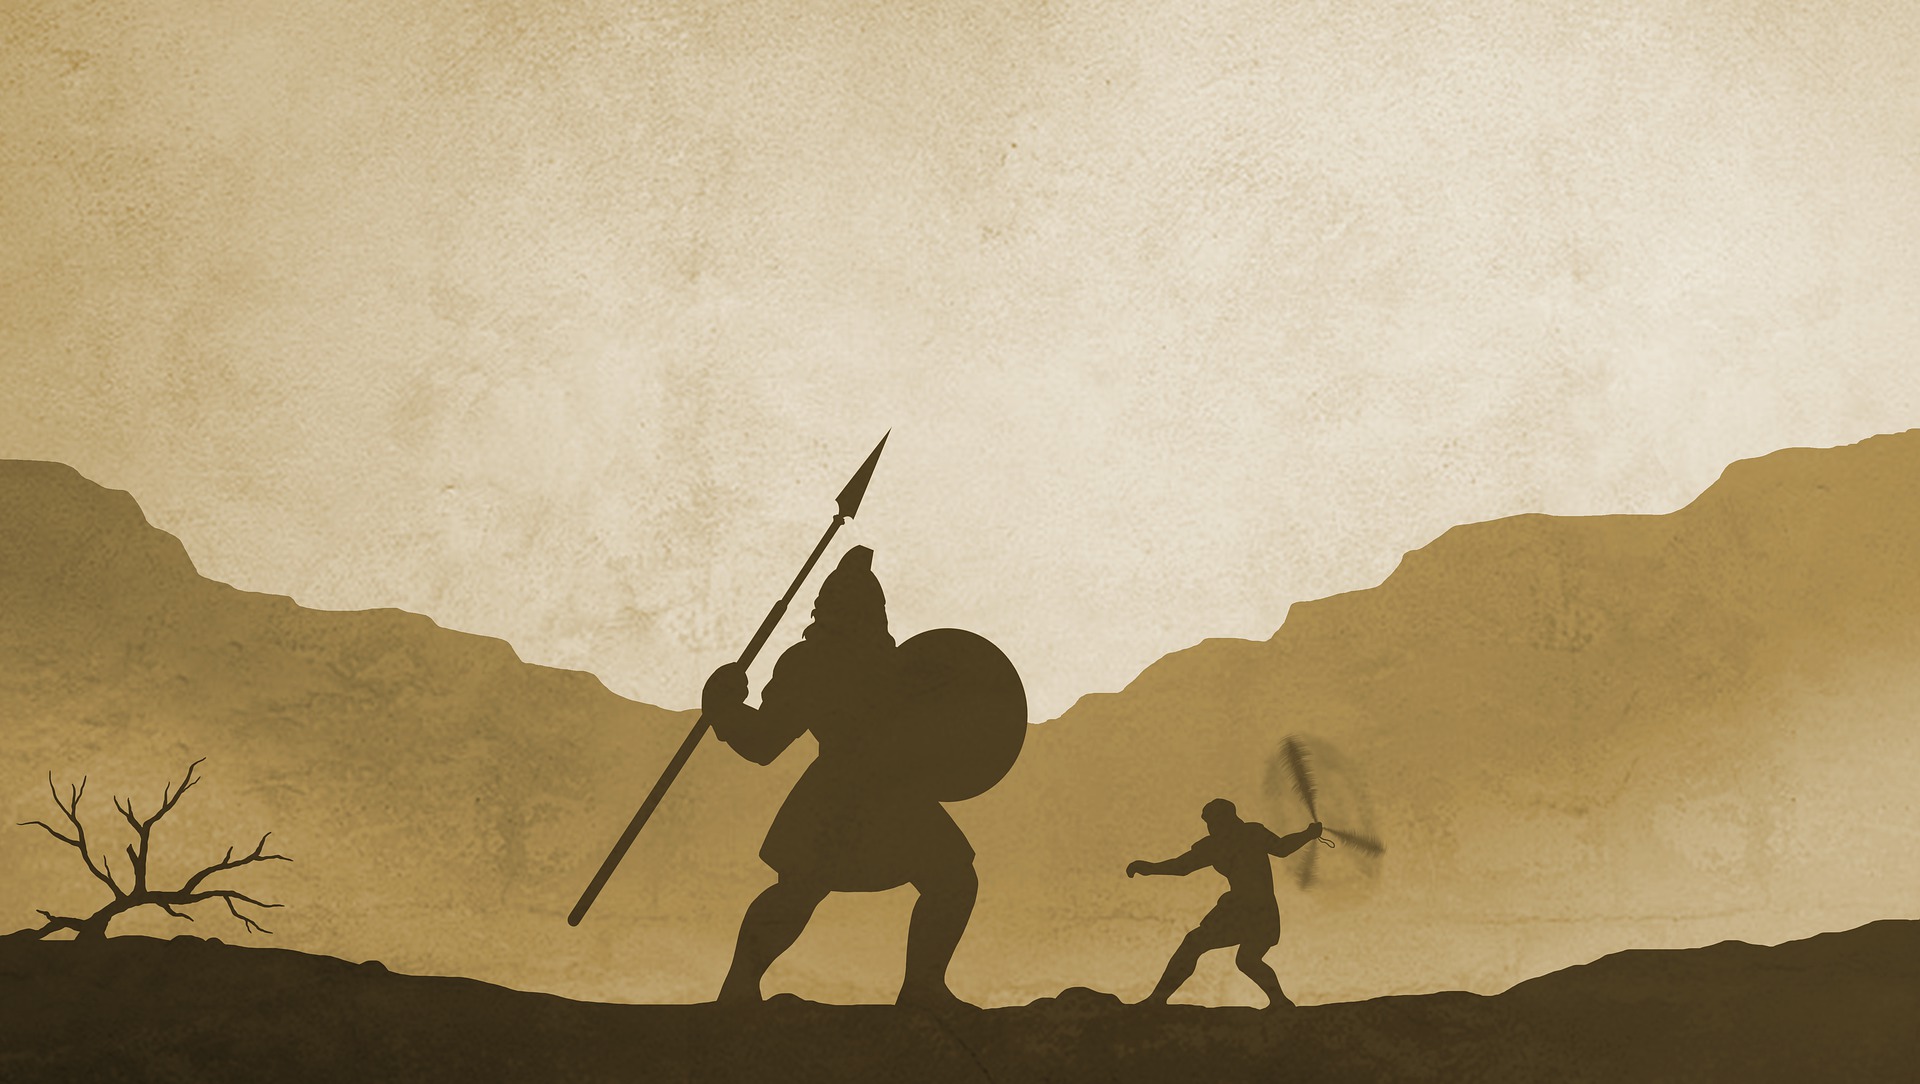 David slew Goliath by the power of God. Never underestimate your opponent or God.